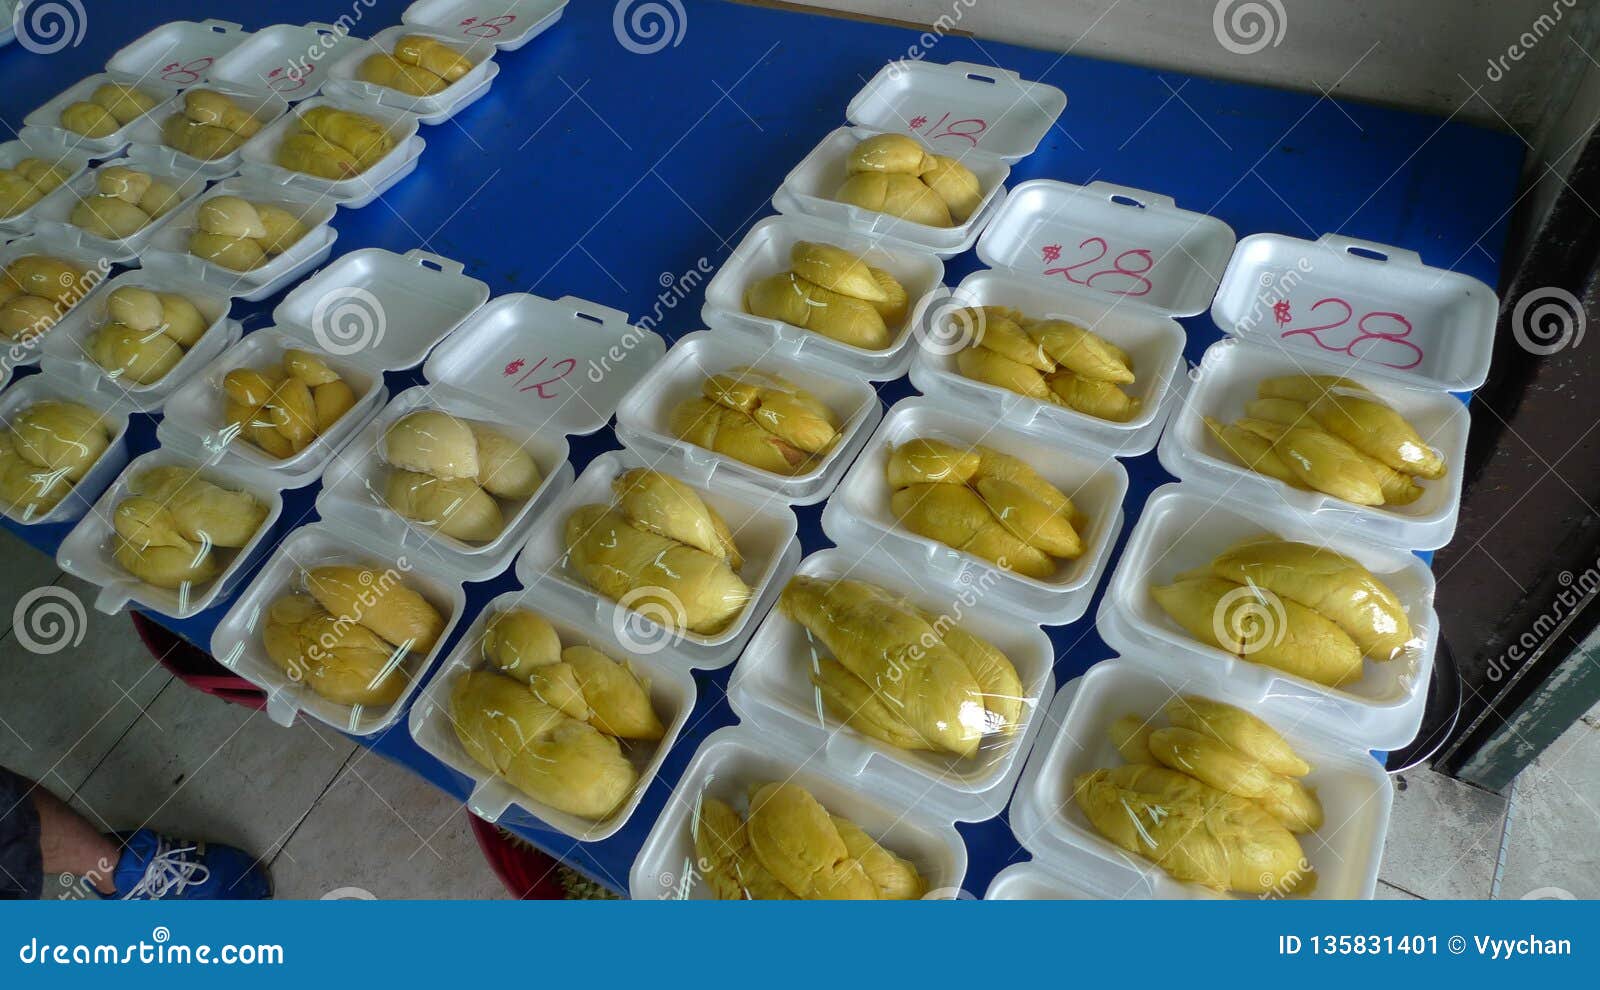 Singapore Chinatown Durian All You Can Eat Durian Buffet Stock Image